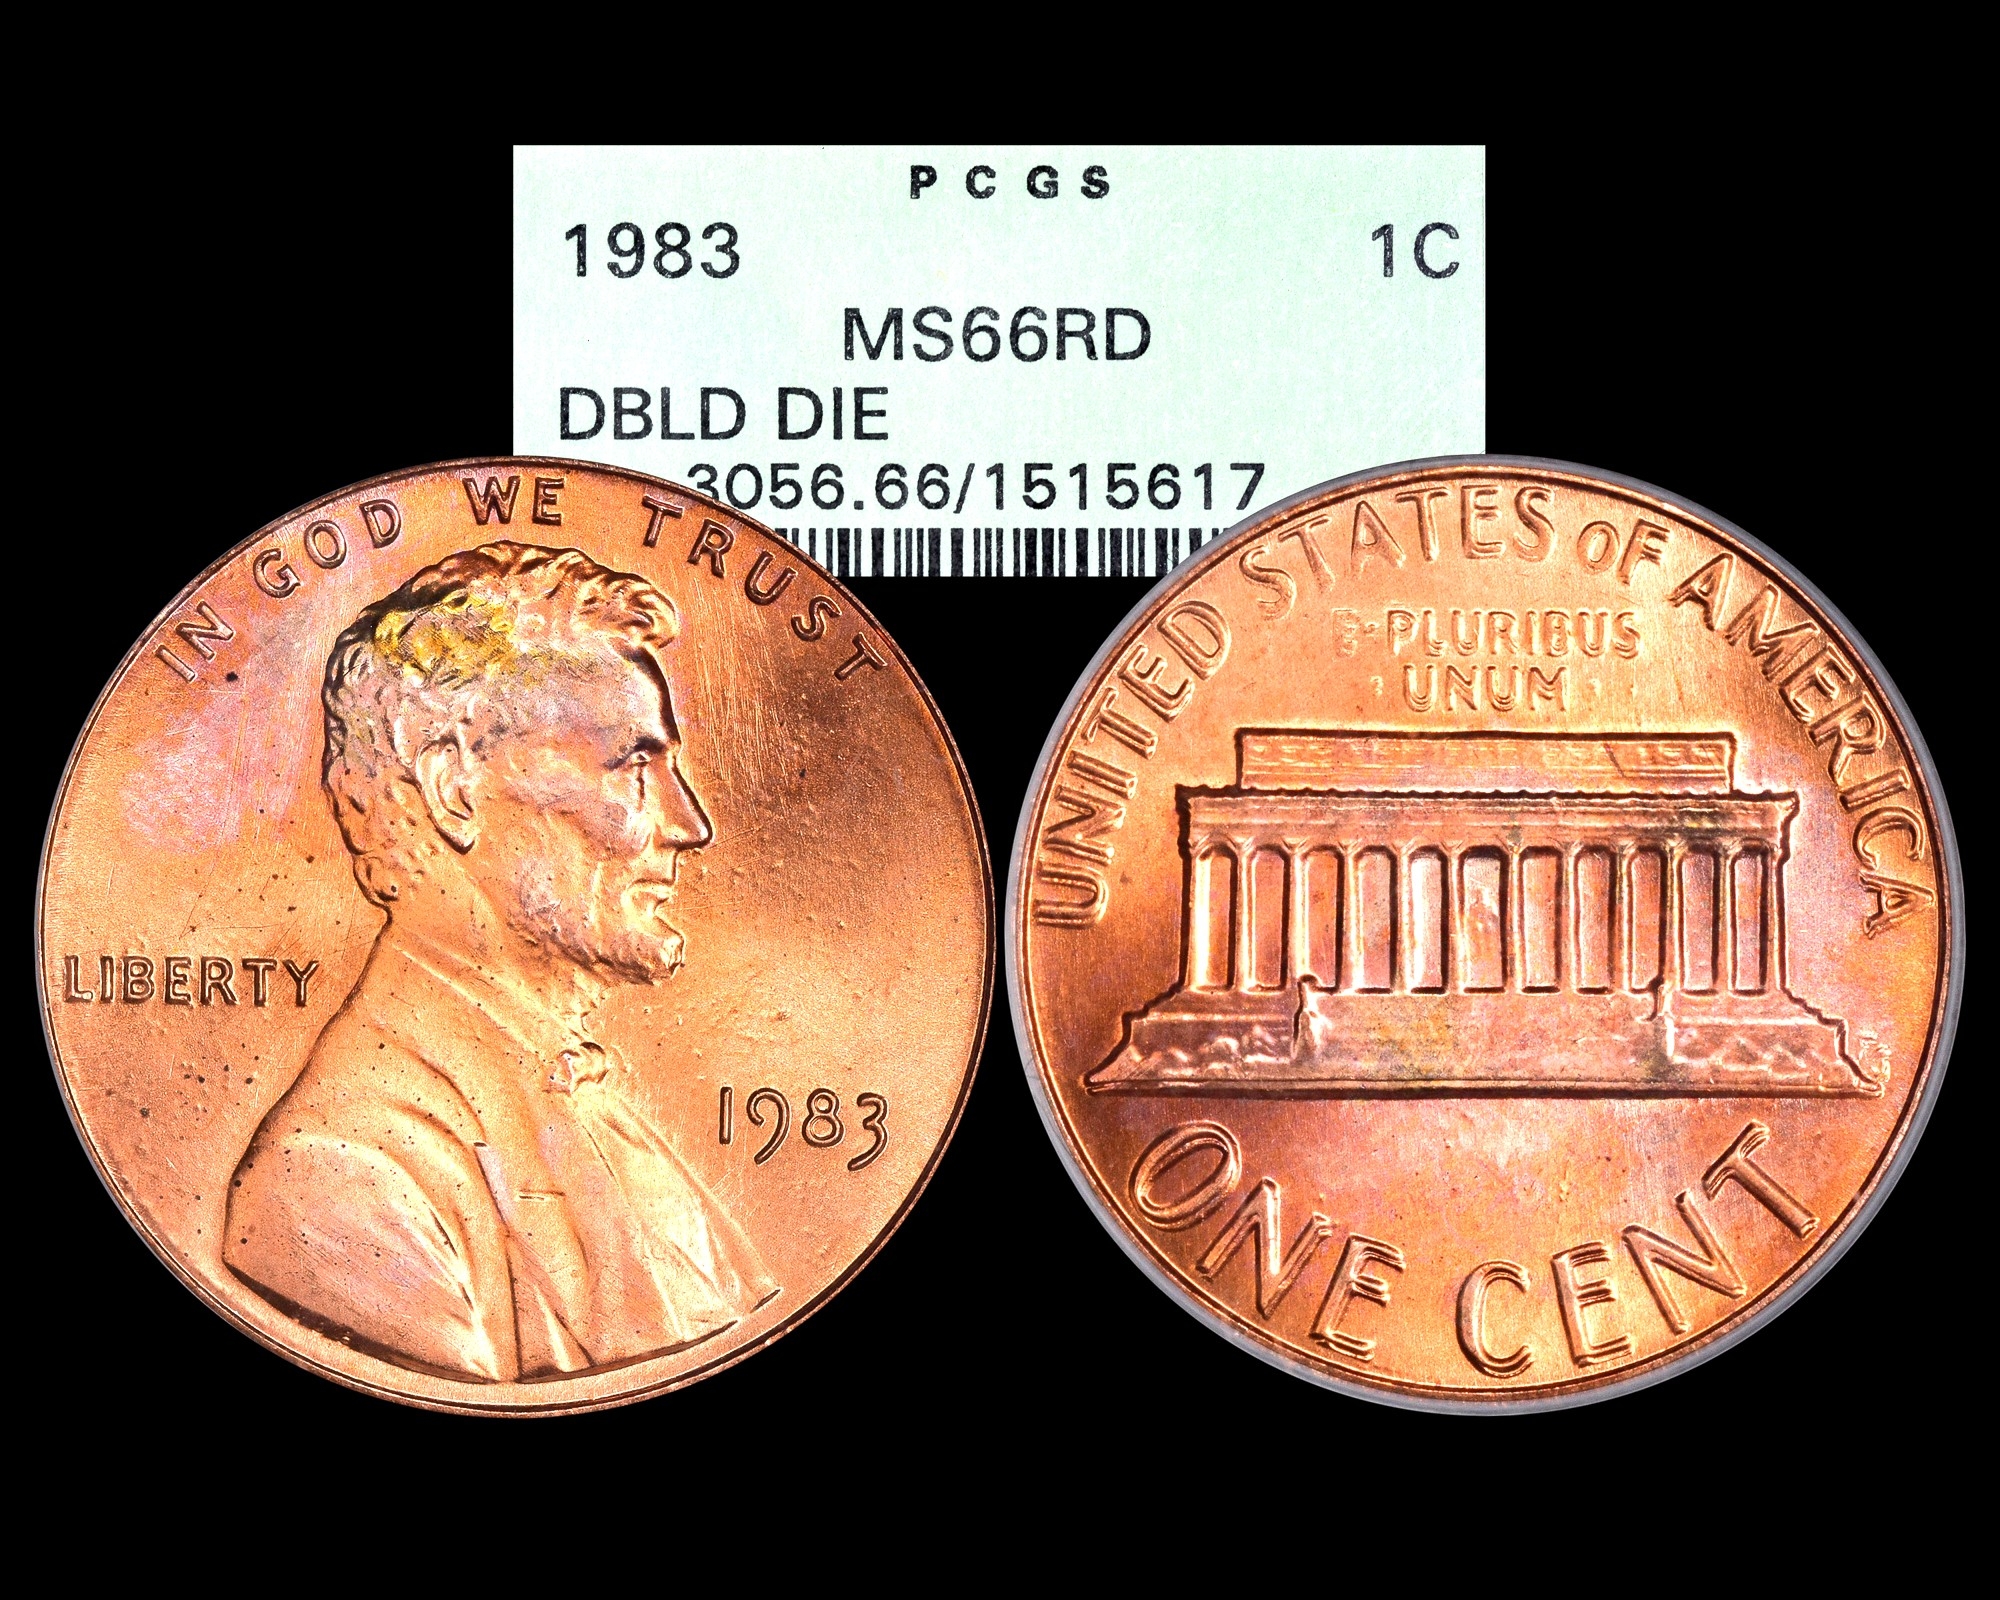 https://thepennylady.com/wp-content/uploads/2022/08/1983-DDR-PCGS-MS66-RD-9-25-22.jpg